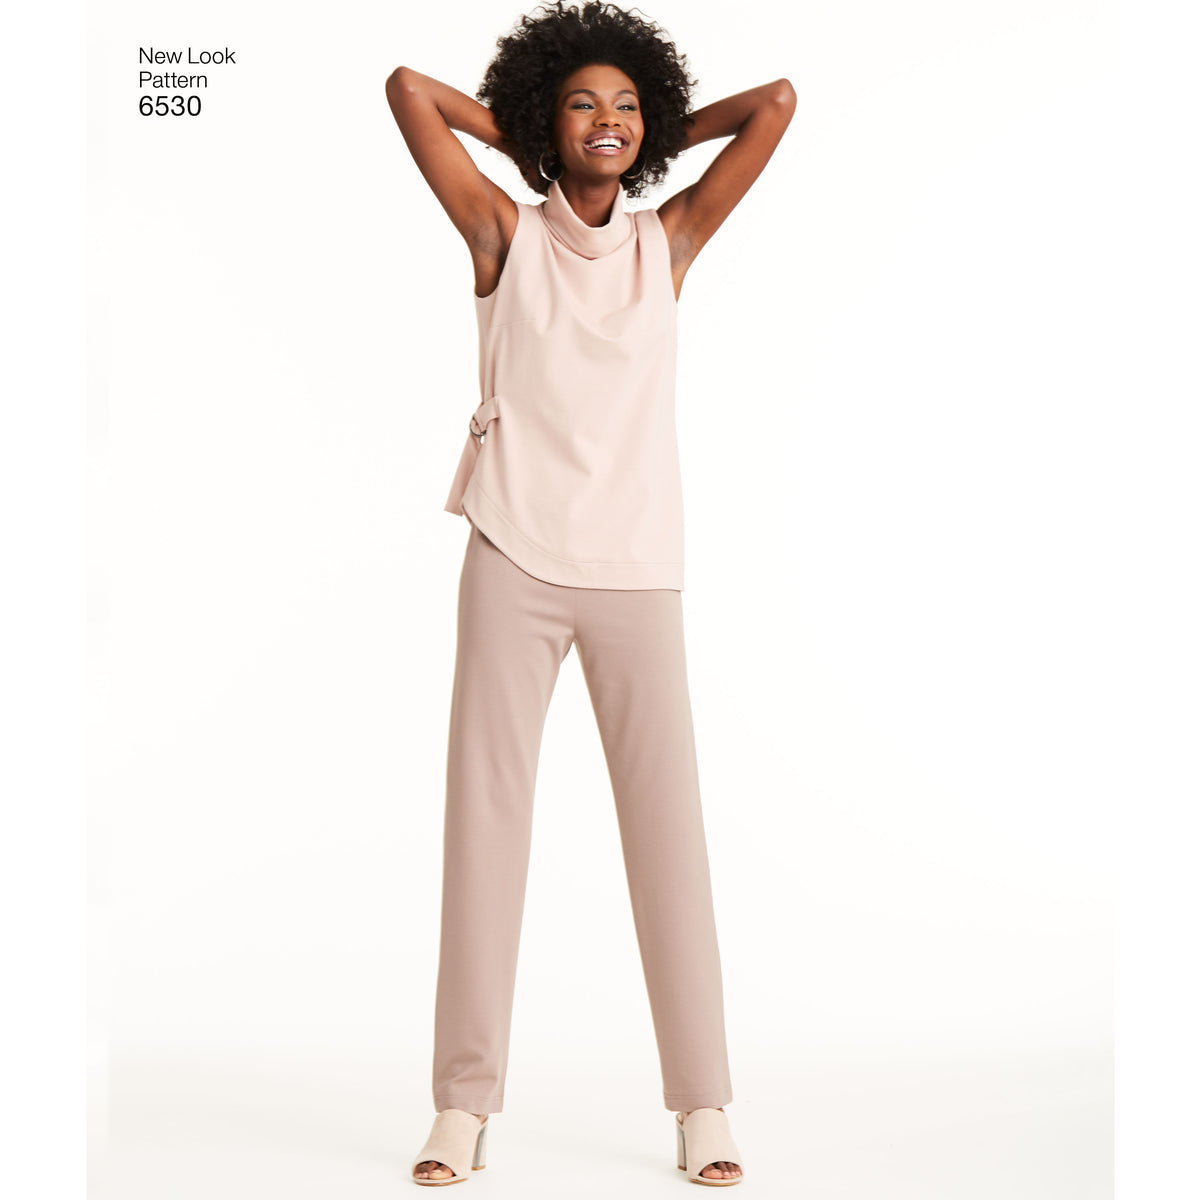 6530 New Look Pattern 6530 Women's Knit trousers, Skirt and Tunic